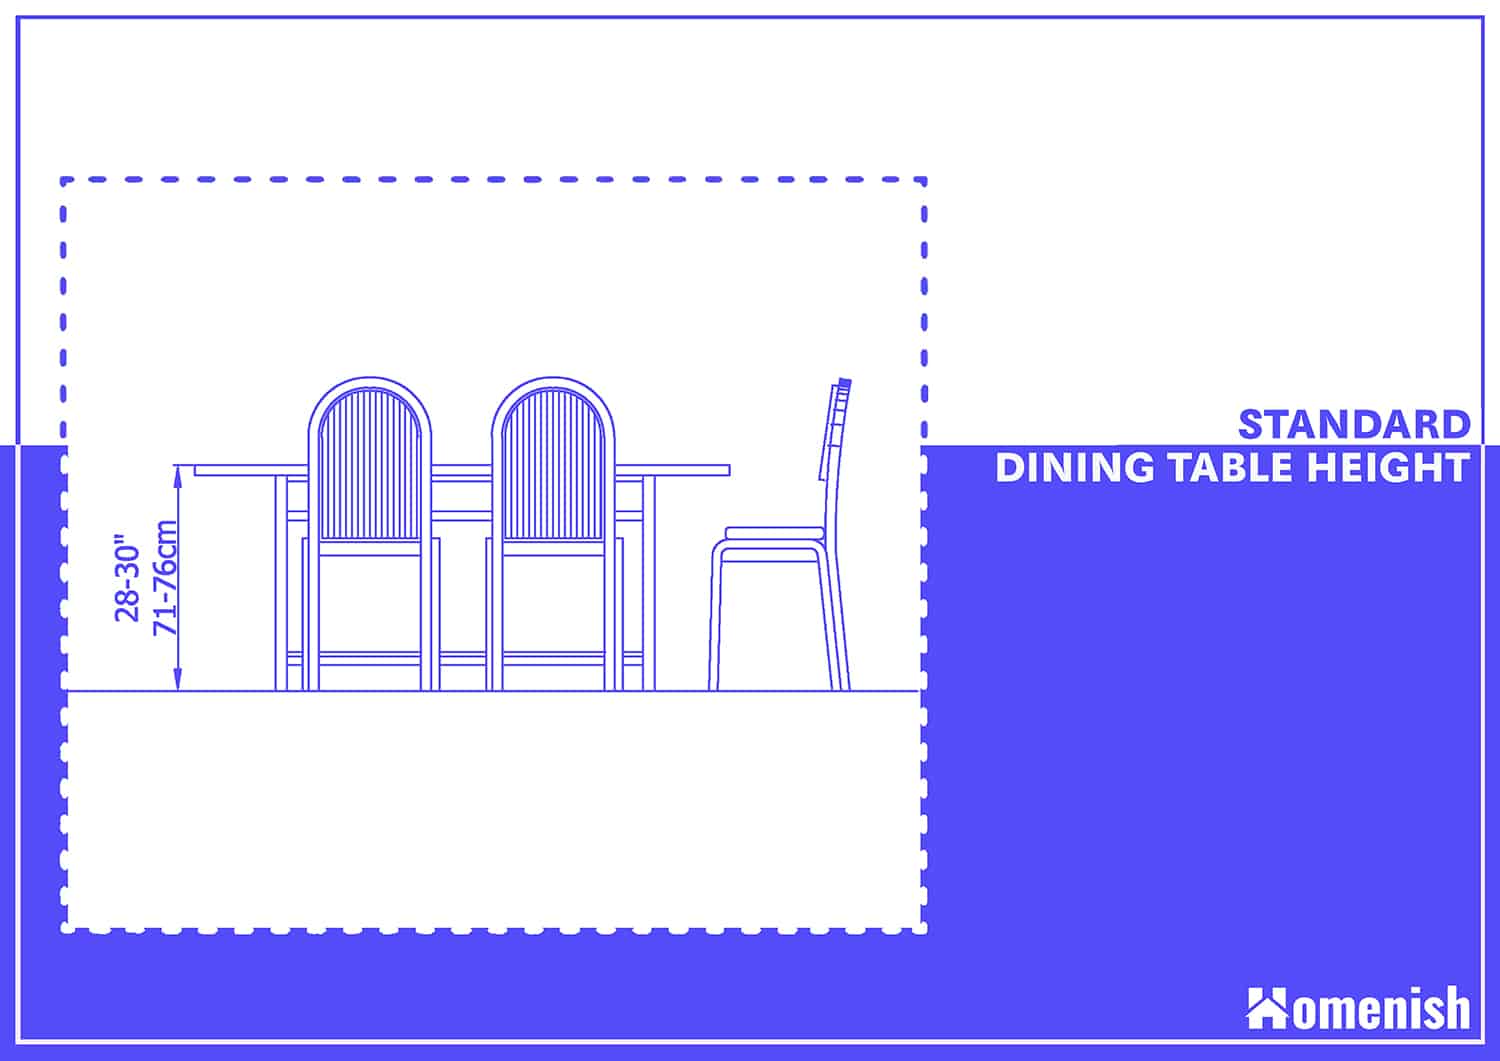 Standard Dining Table Height